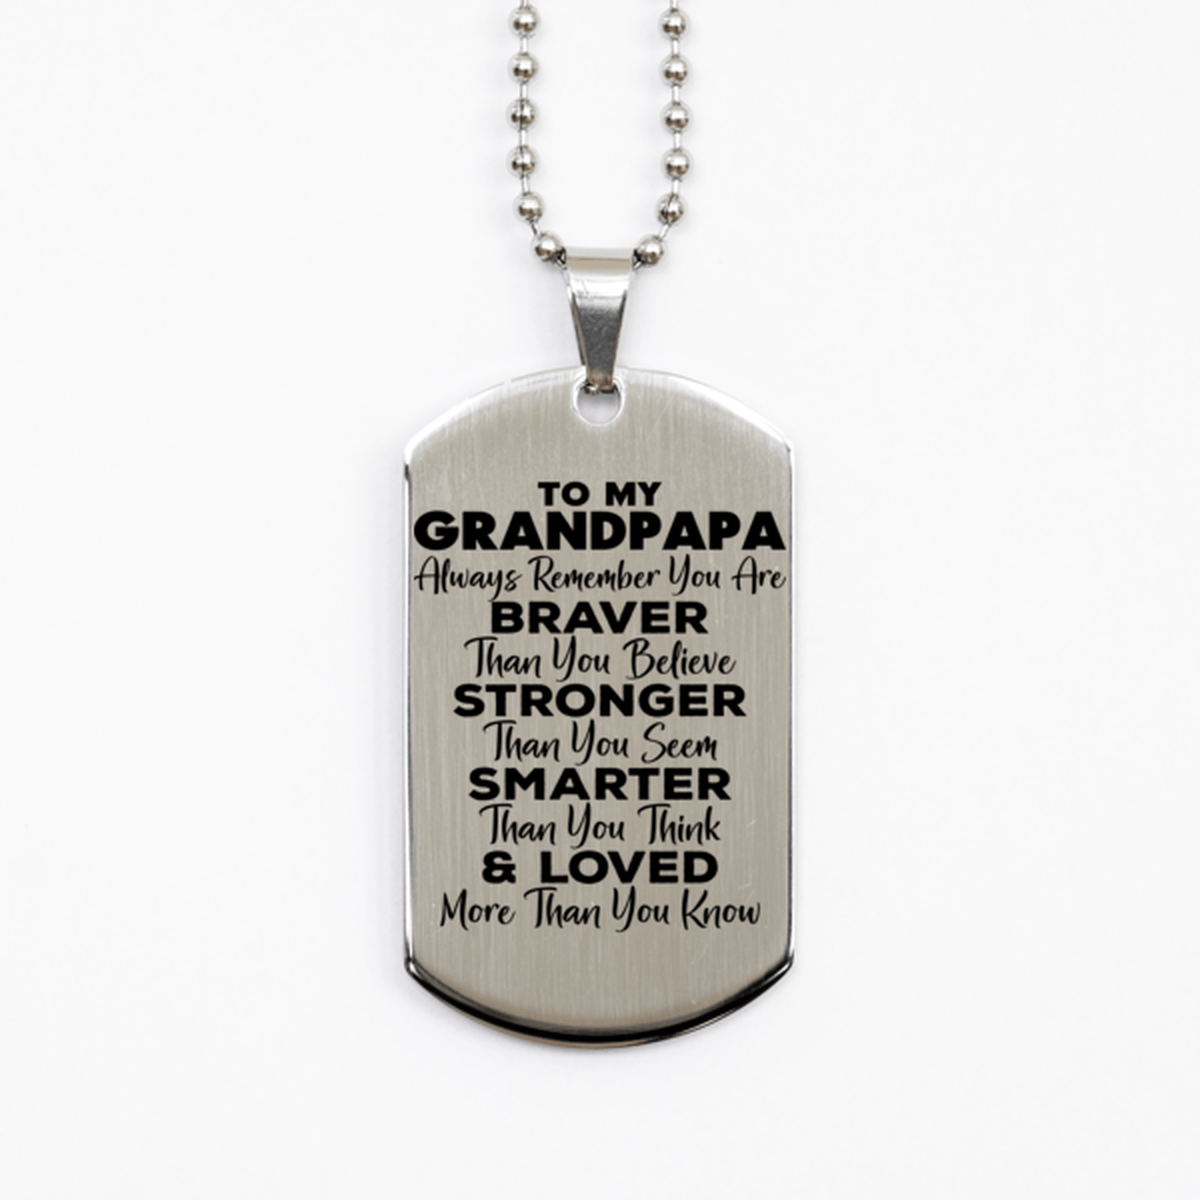 Motivational Grandpapa Silver Dog Tag Necklace, Grandpapa Always Remember You Are Braver Than You Believe, Best Birthday Gifts for Grandpapa